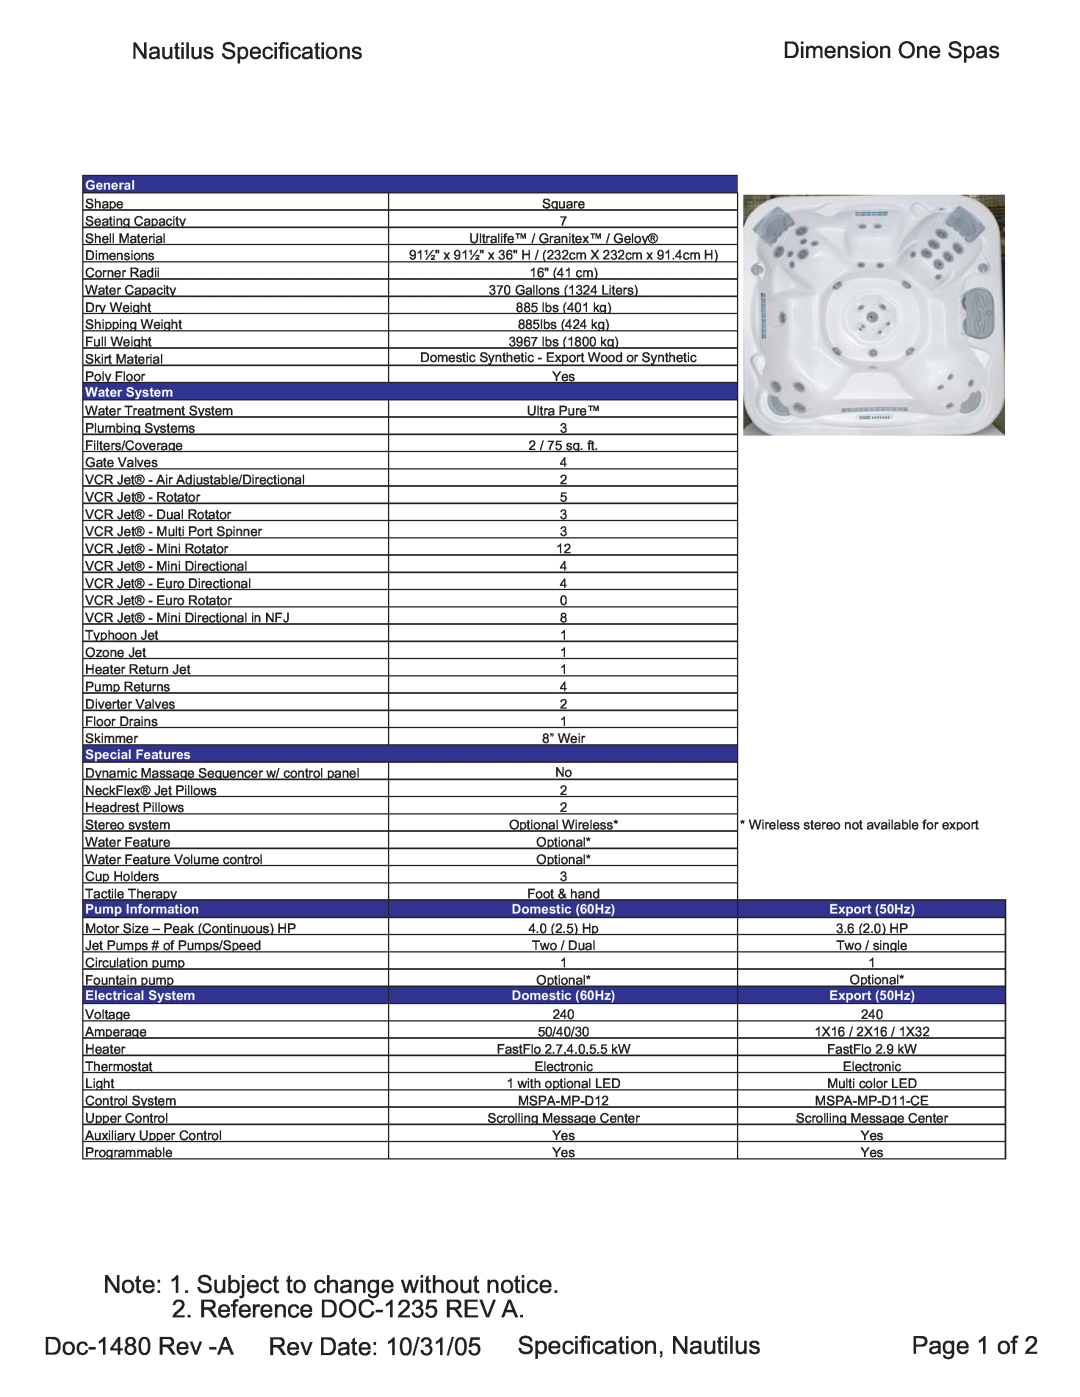 Dimension One Spas Nautilus specifications Note 1. Subject to change without notice, Reference DOC-1235 REV A, Page 1 of 